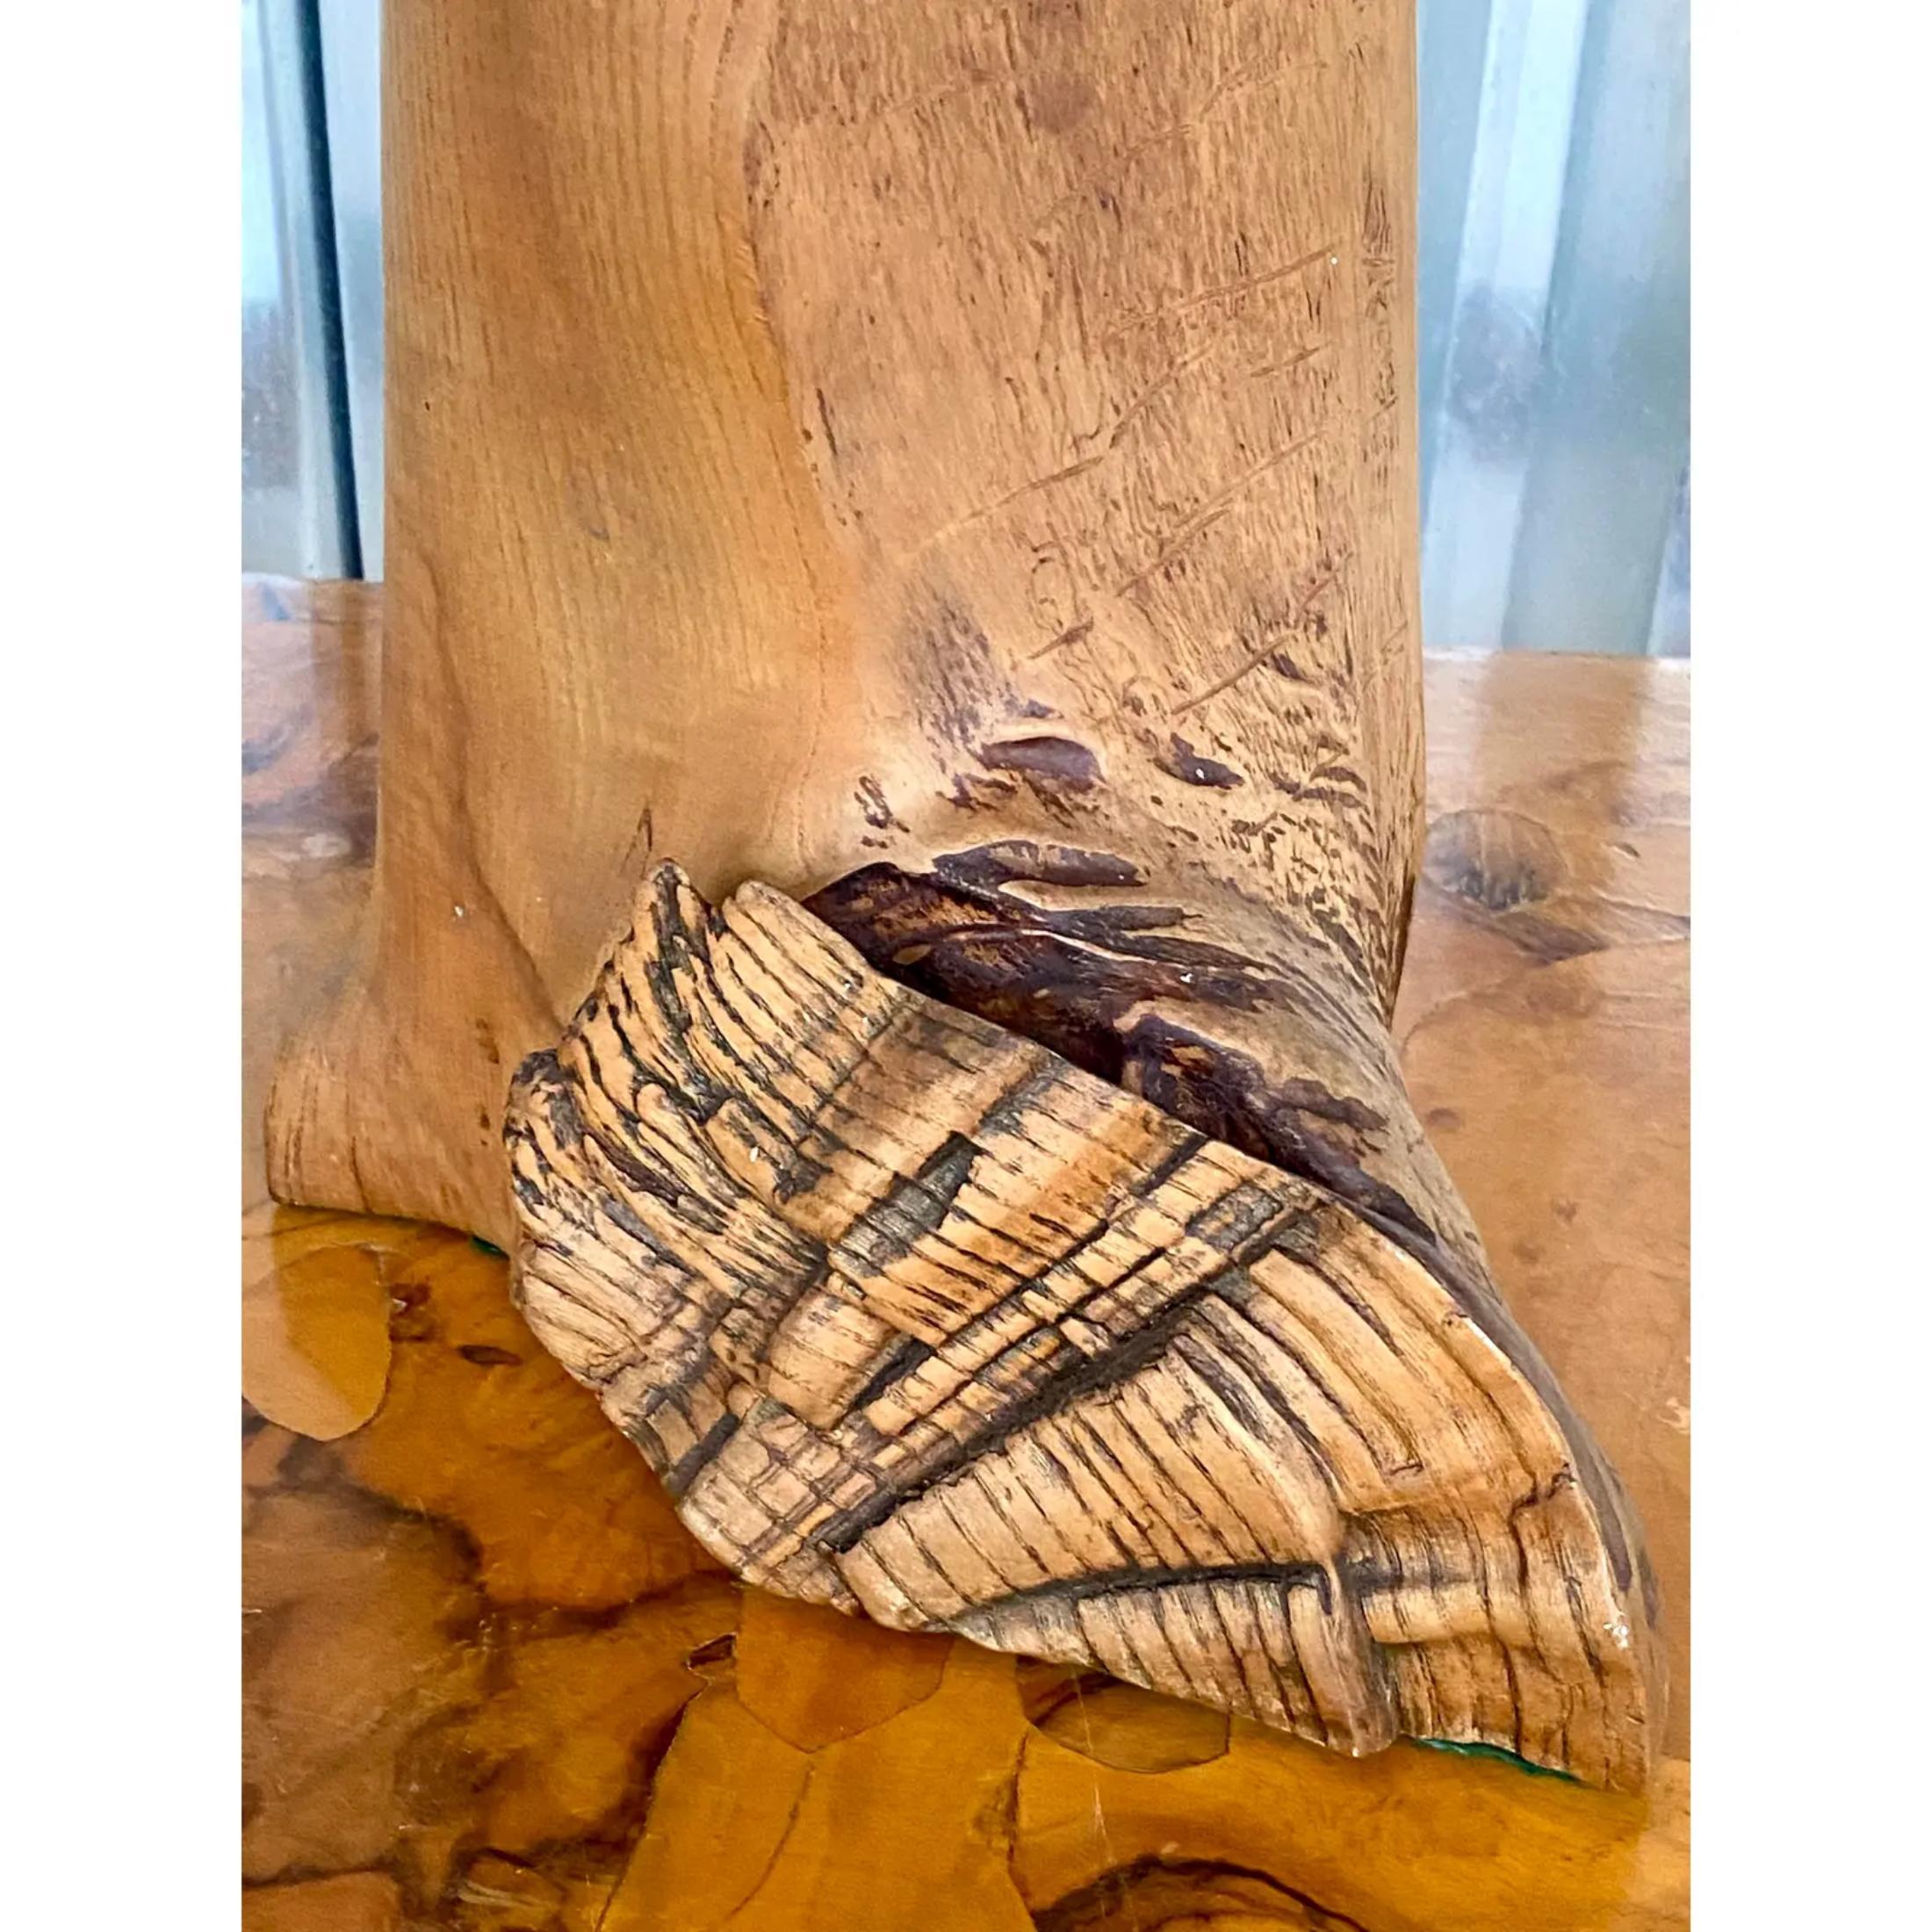 Fantastic vintage Boho wood lamp. Gorgeous finished wood knuckle with a craved area towards the bottom. A really striking lamp. Acquired from a Palm Beach estate